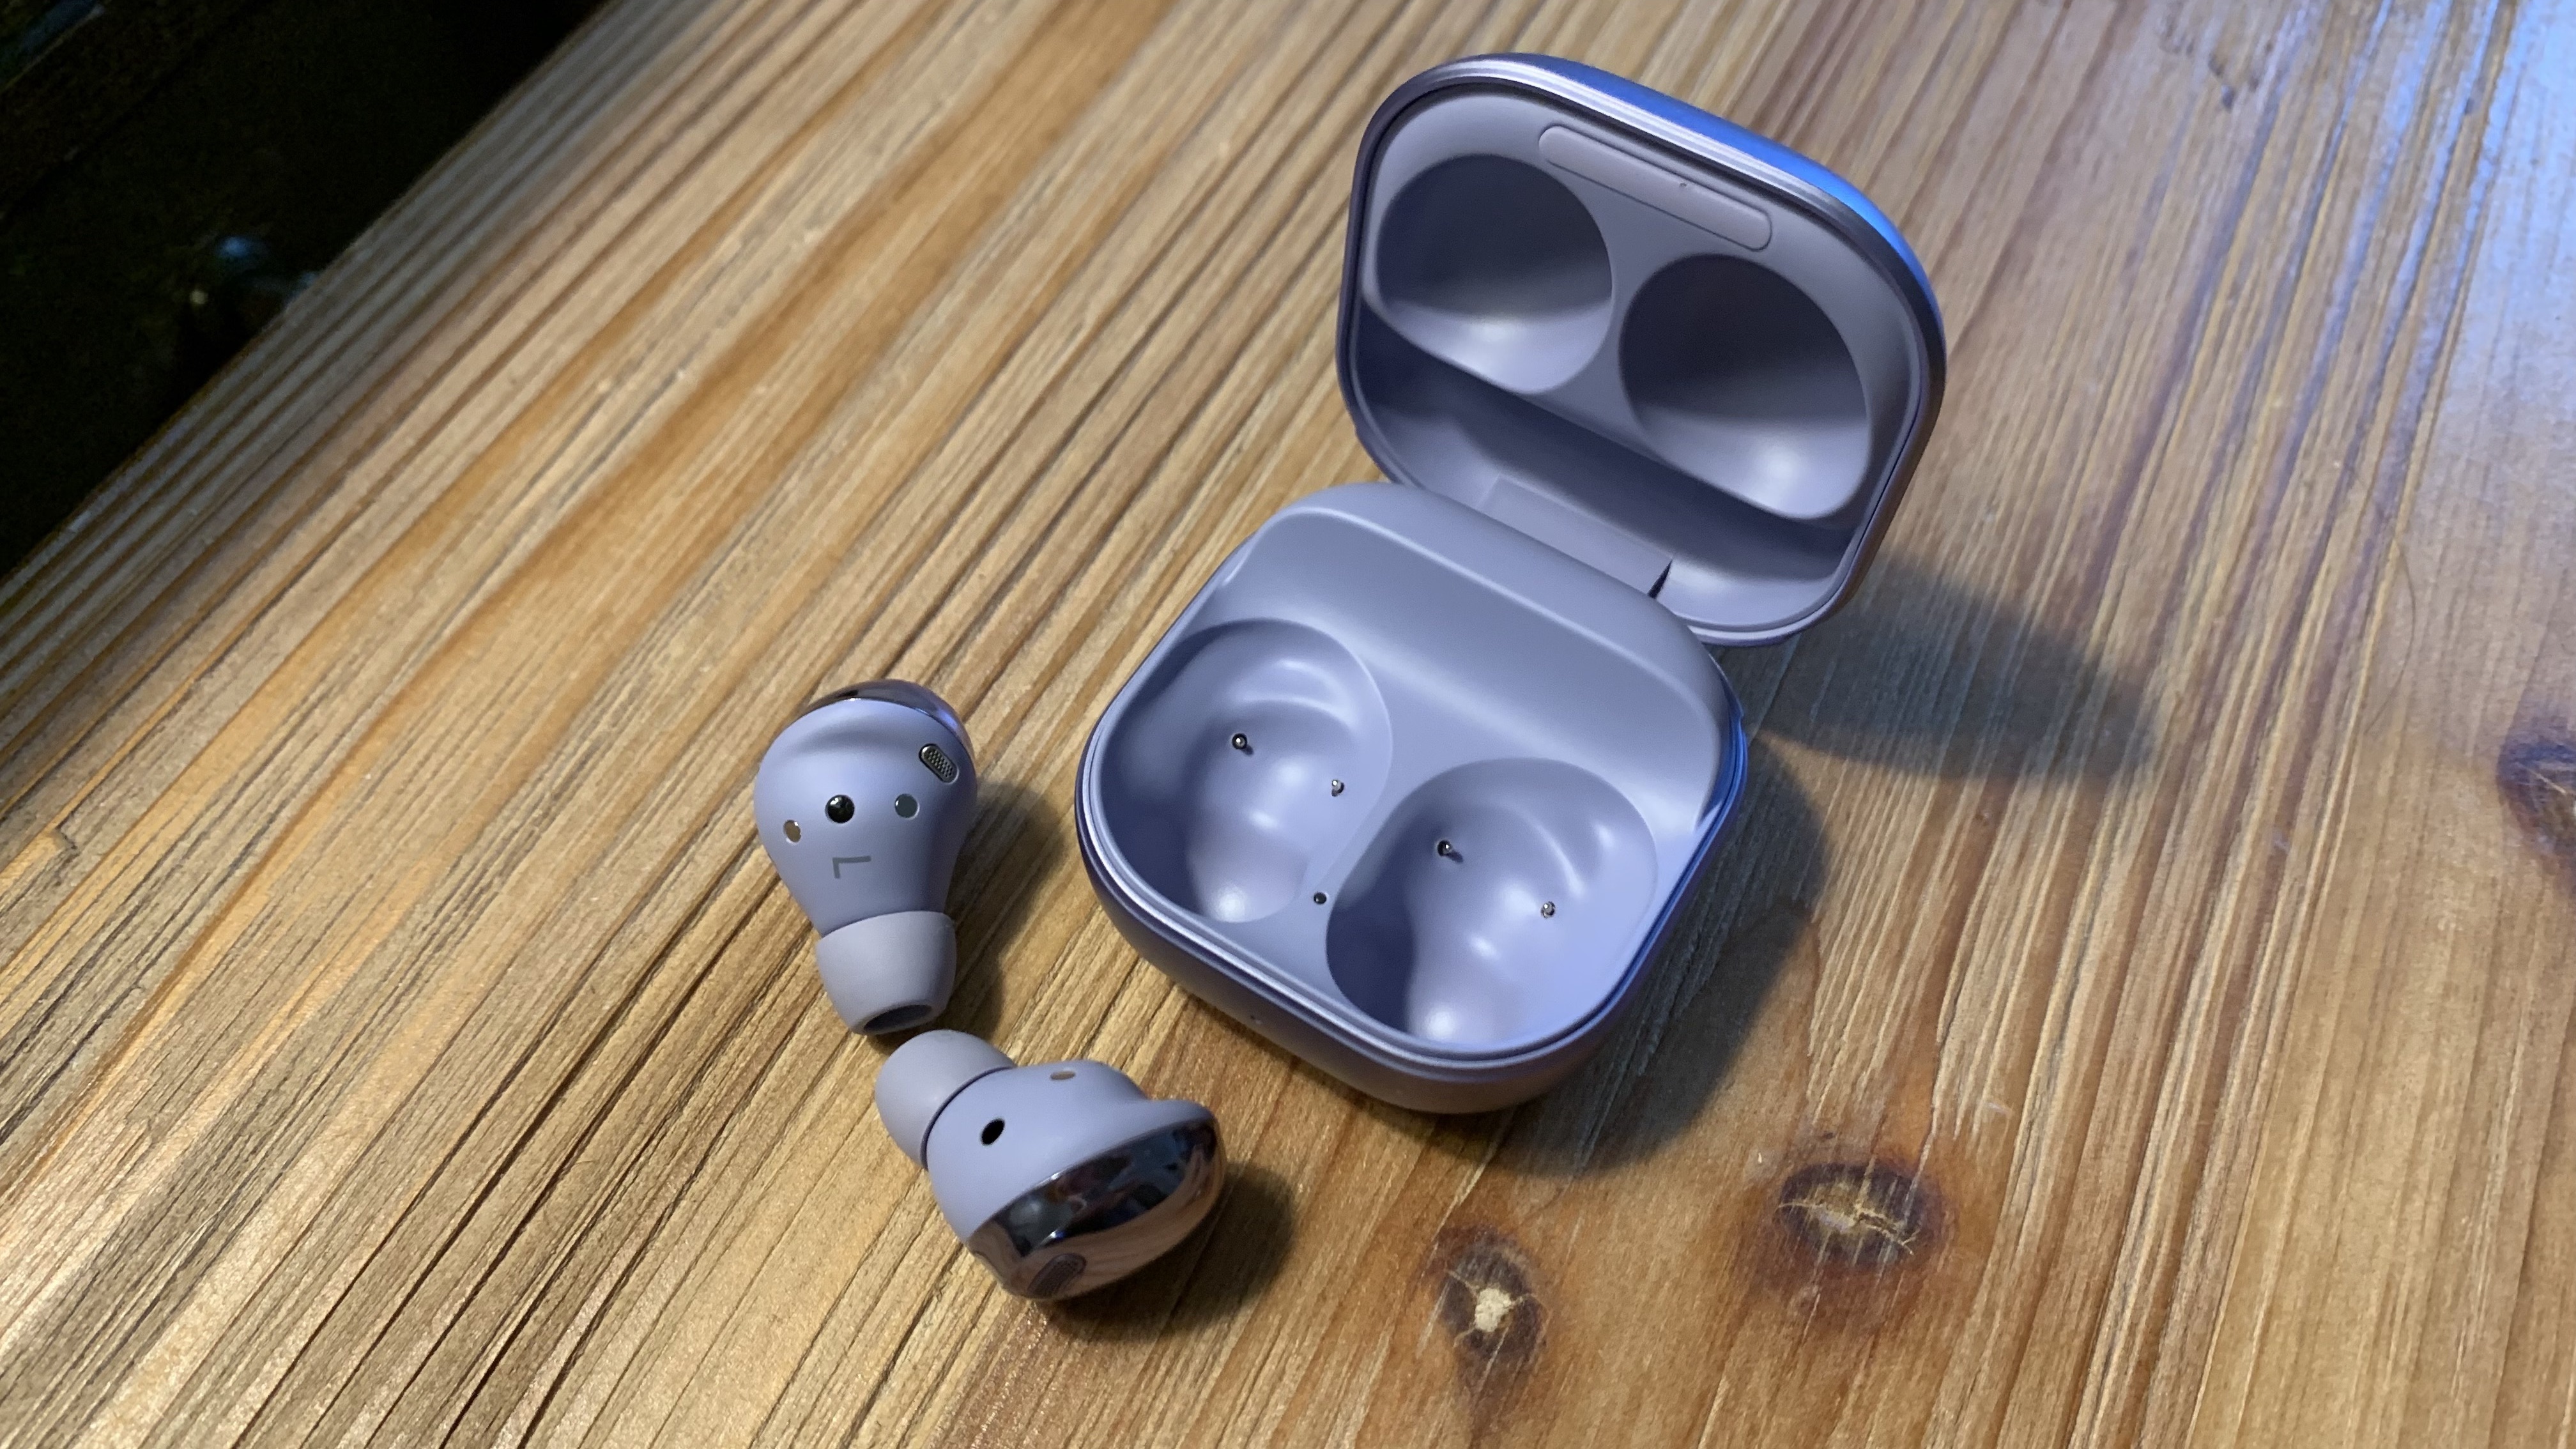 Galaxy Buds Pro Review: Sound quality over comfort